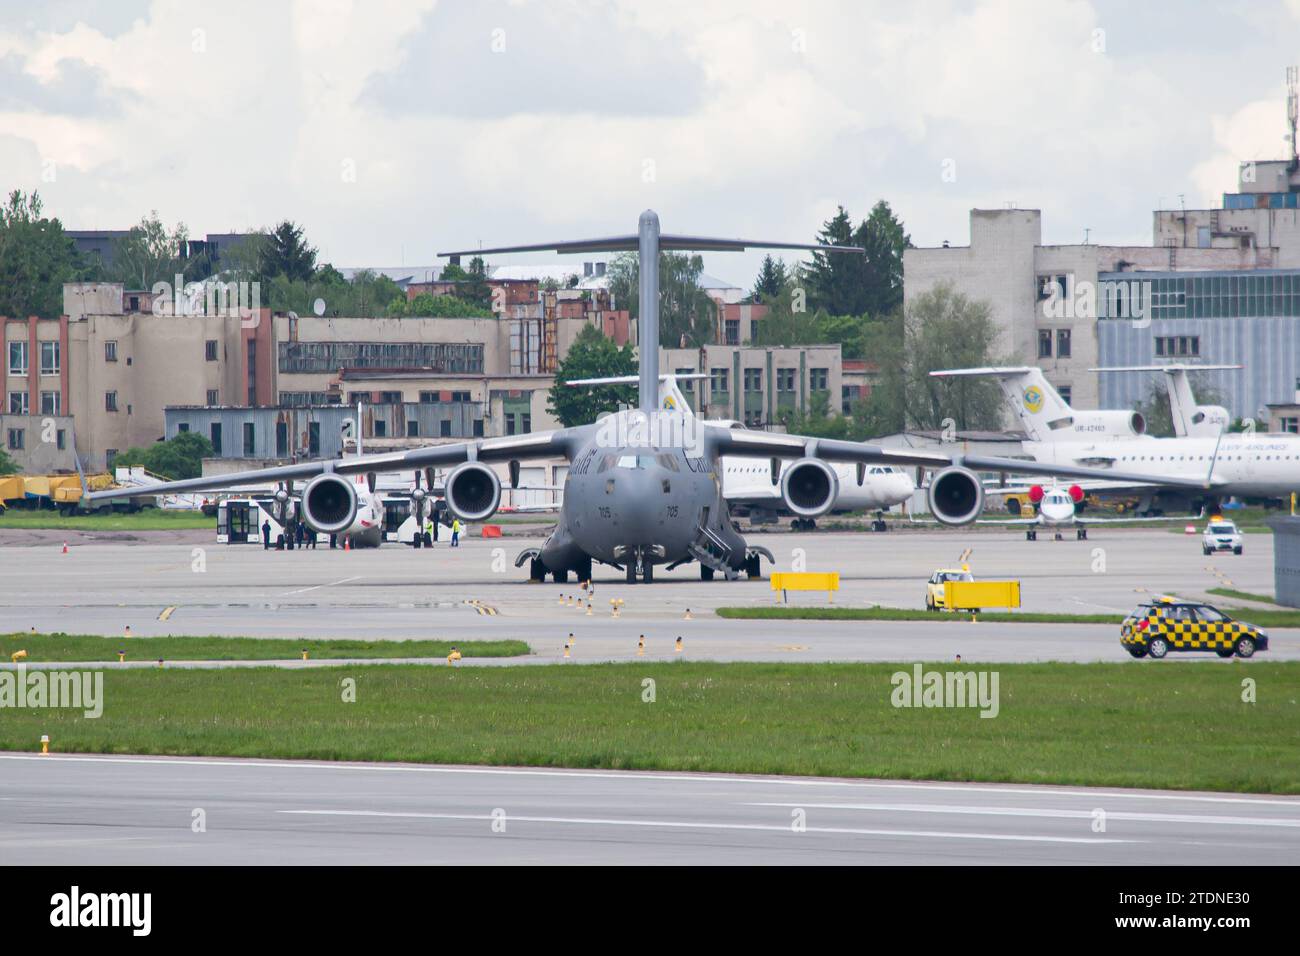 Royal Canadian Armed Forces Boeing CC-177 face-to-face while parked at Lviv Airport Stock Photo